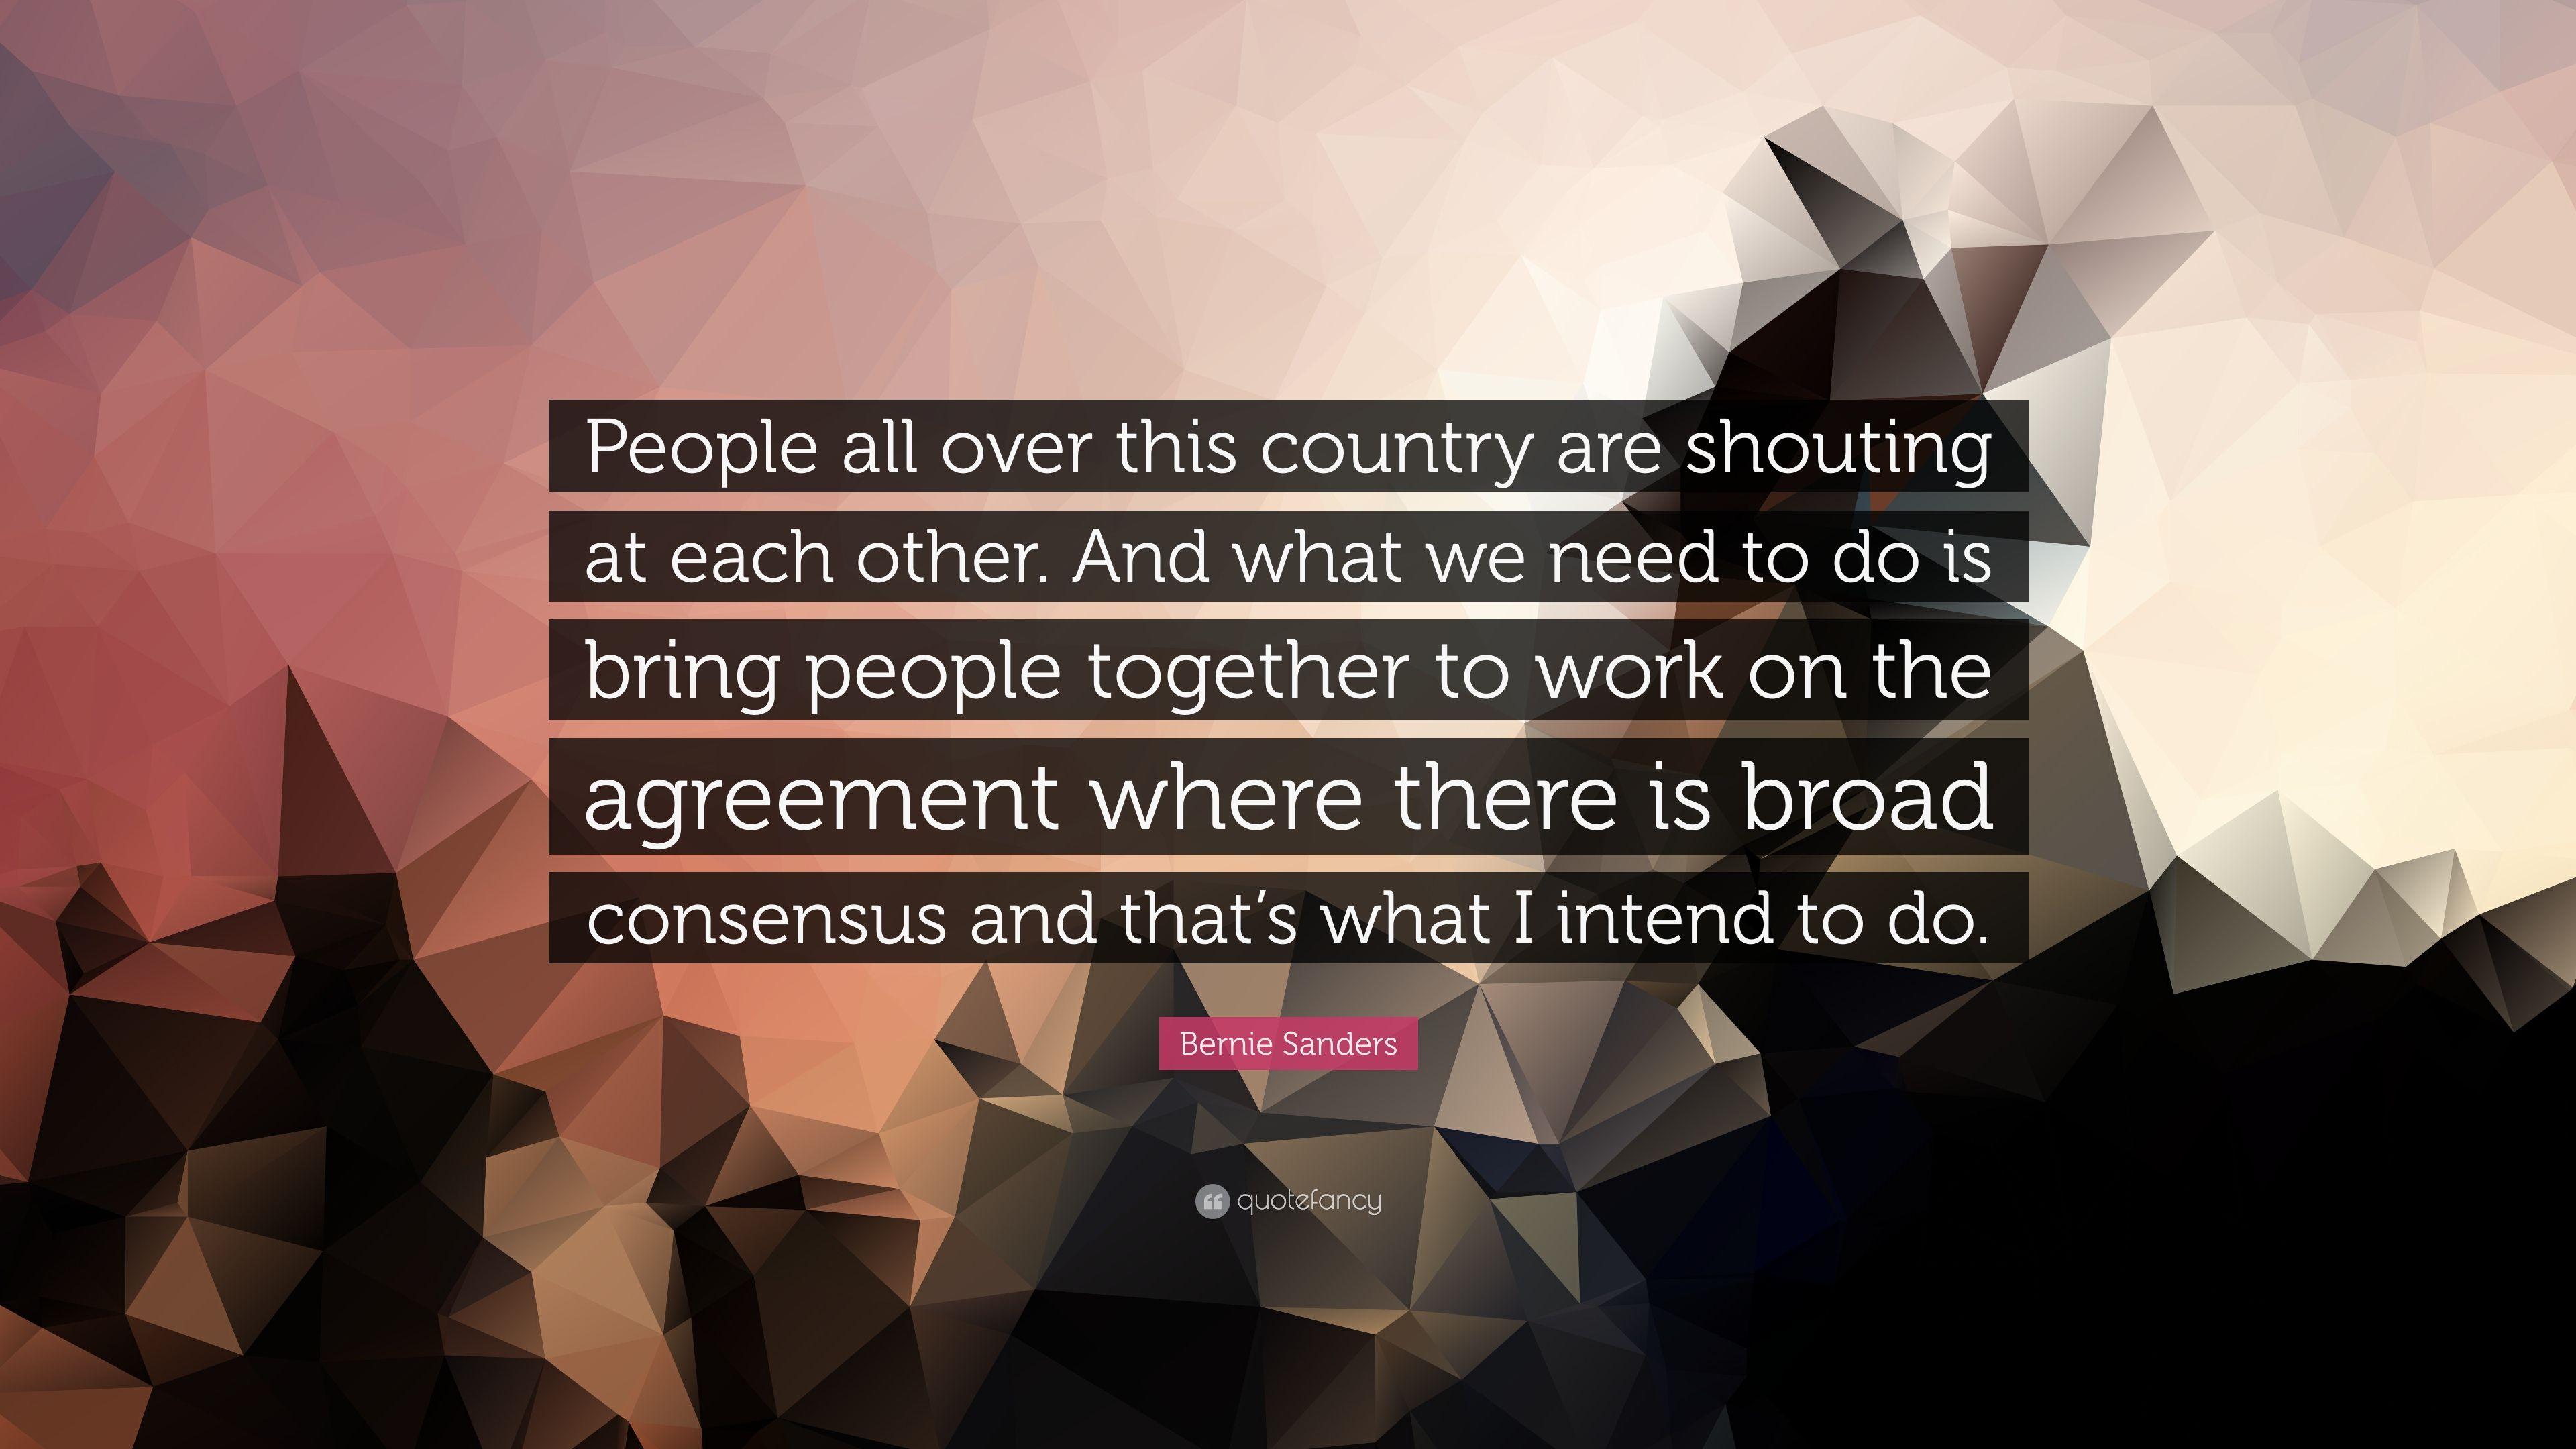 Bernie Sanders Quote: “People all over this country are shouting at